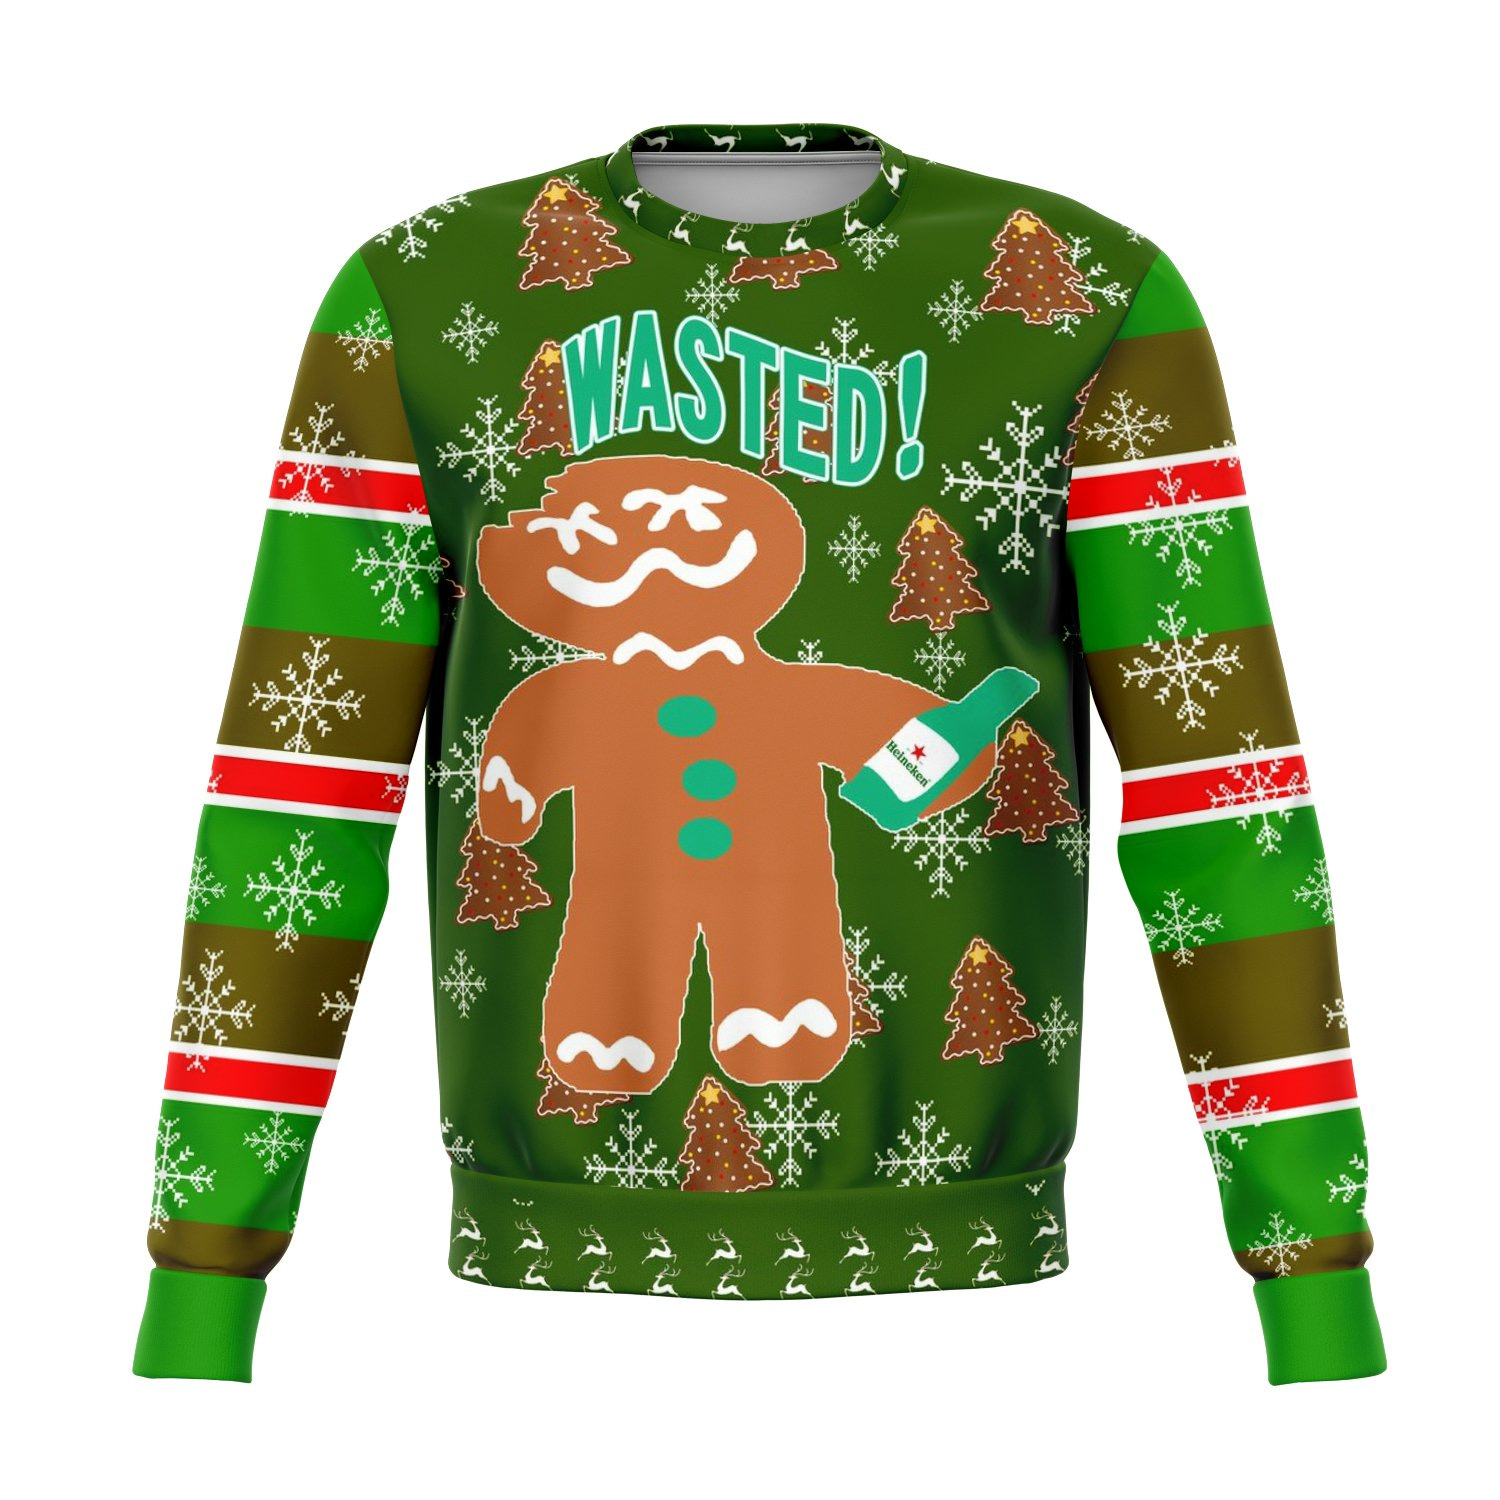 Wasted Ugly Sweater